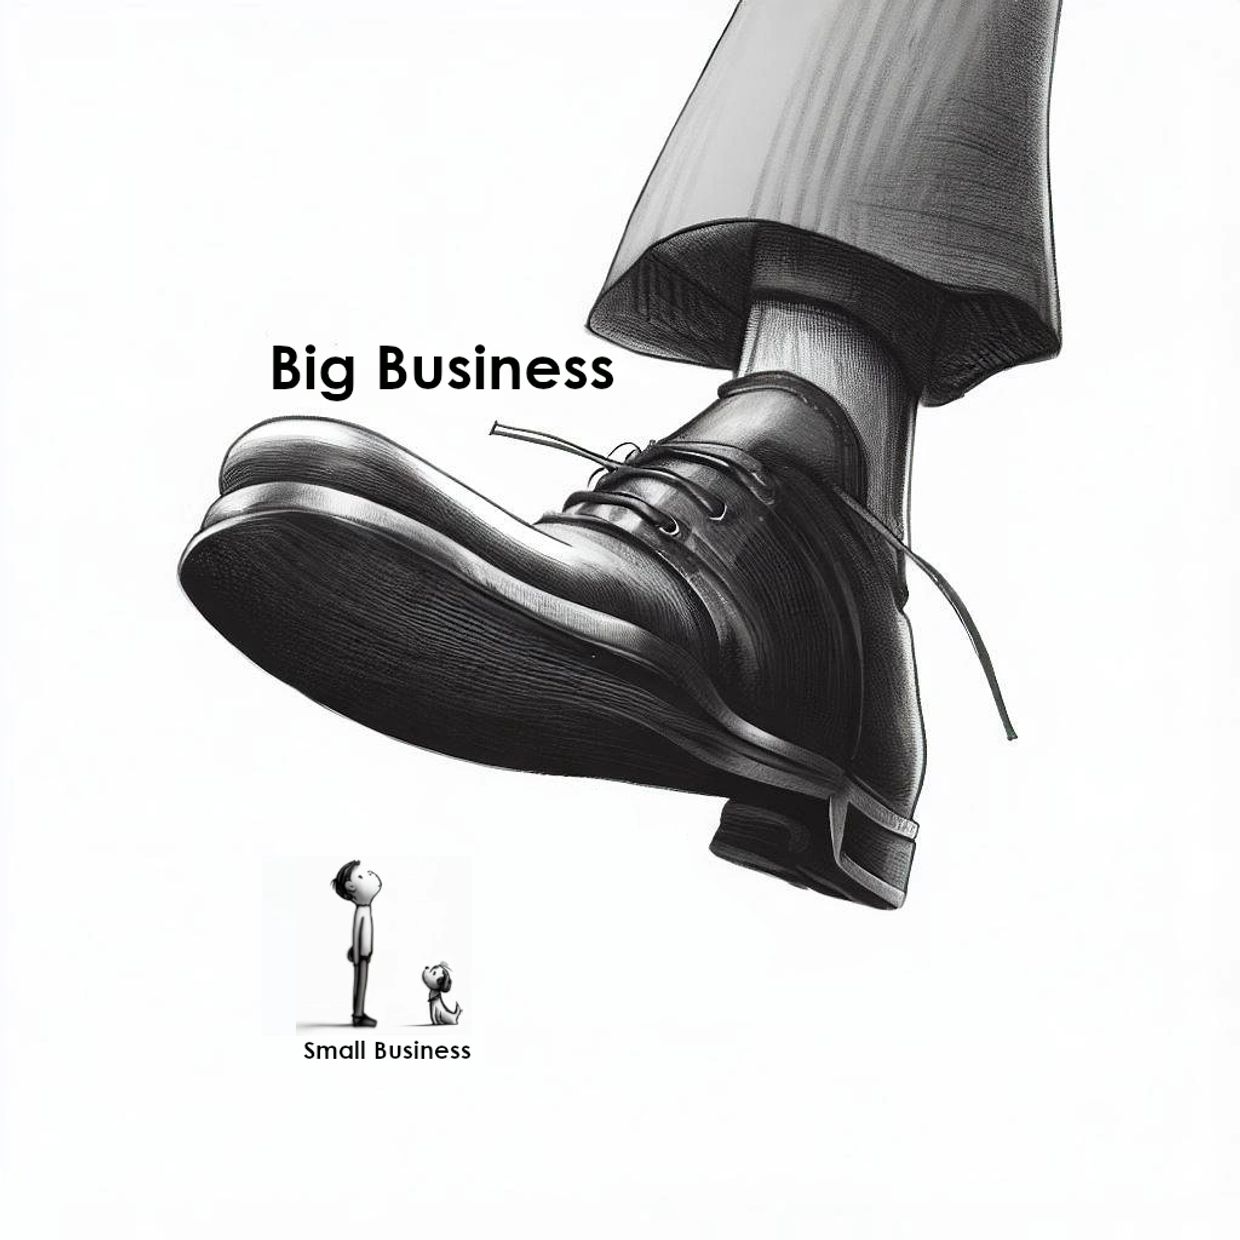 Big Business and the little guy